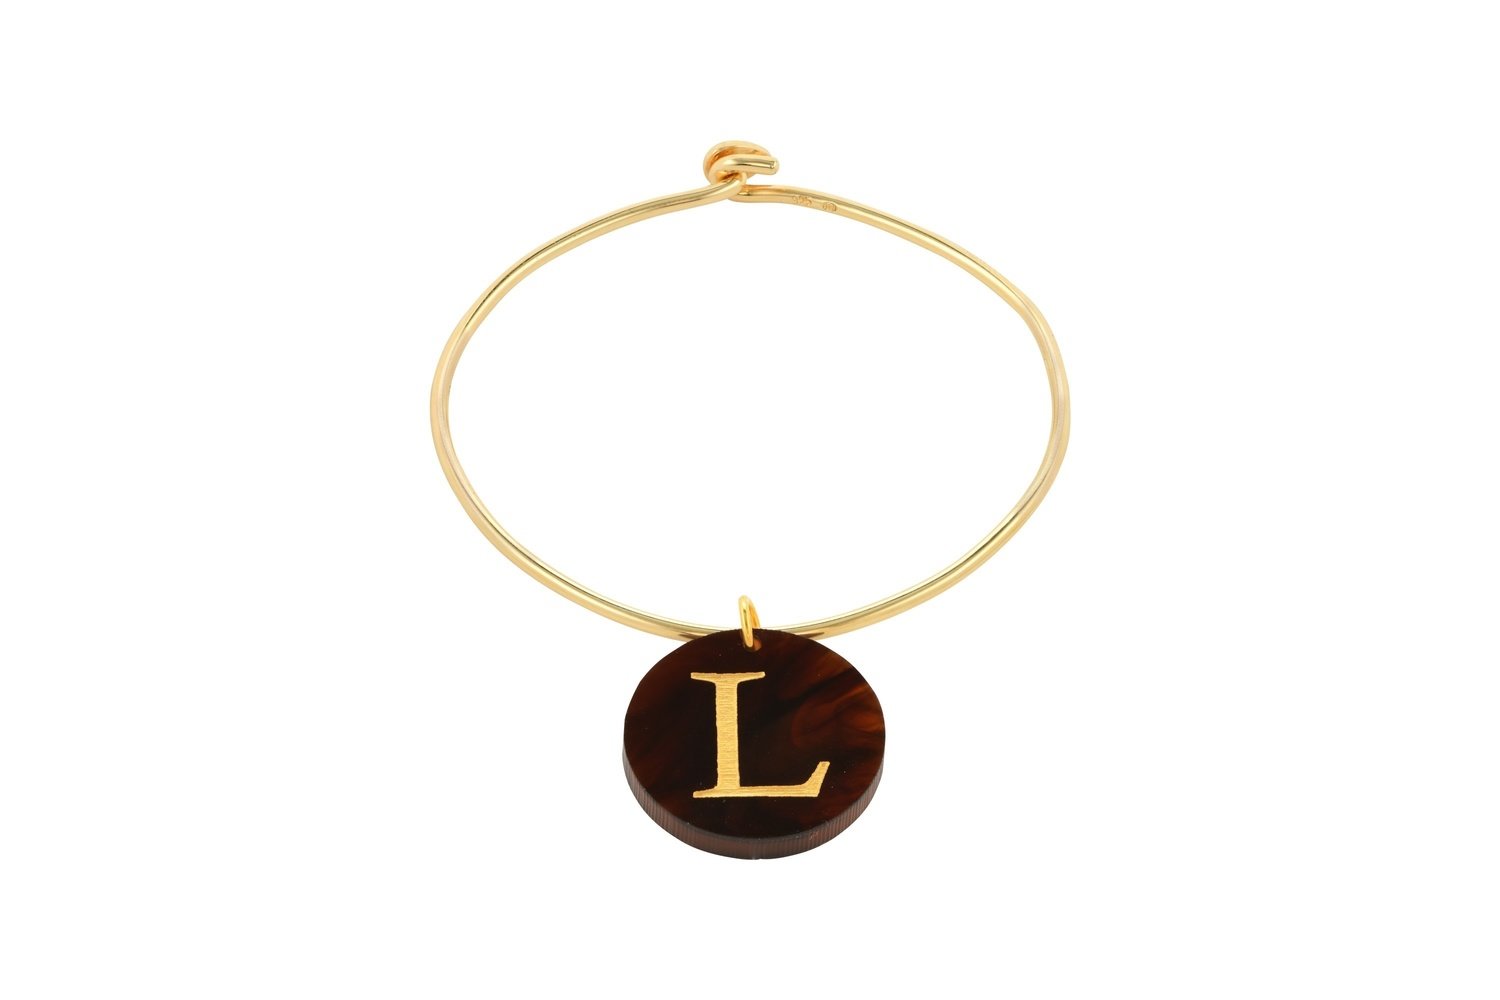 Alphabet Charm with Sterling Silver Bangle Bracelet with Yellow Gold Plating